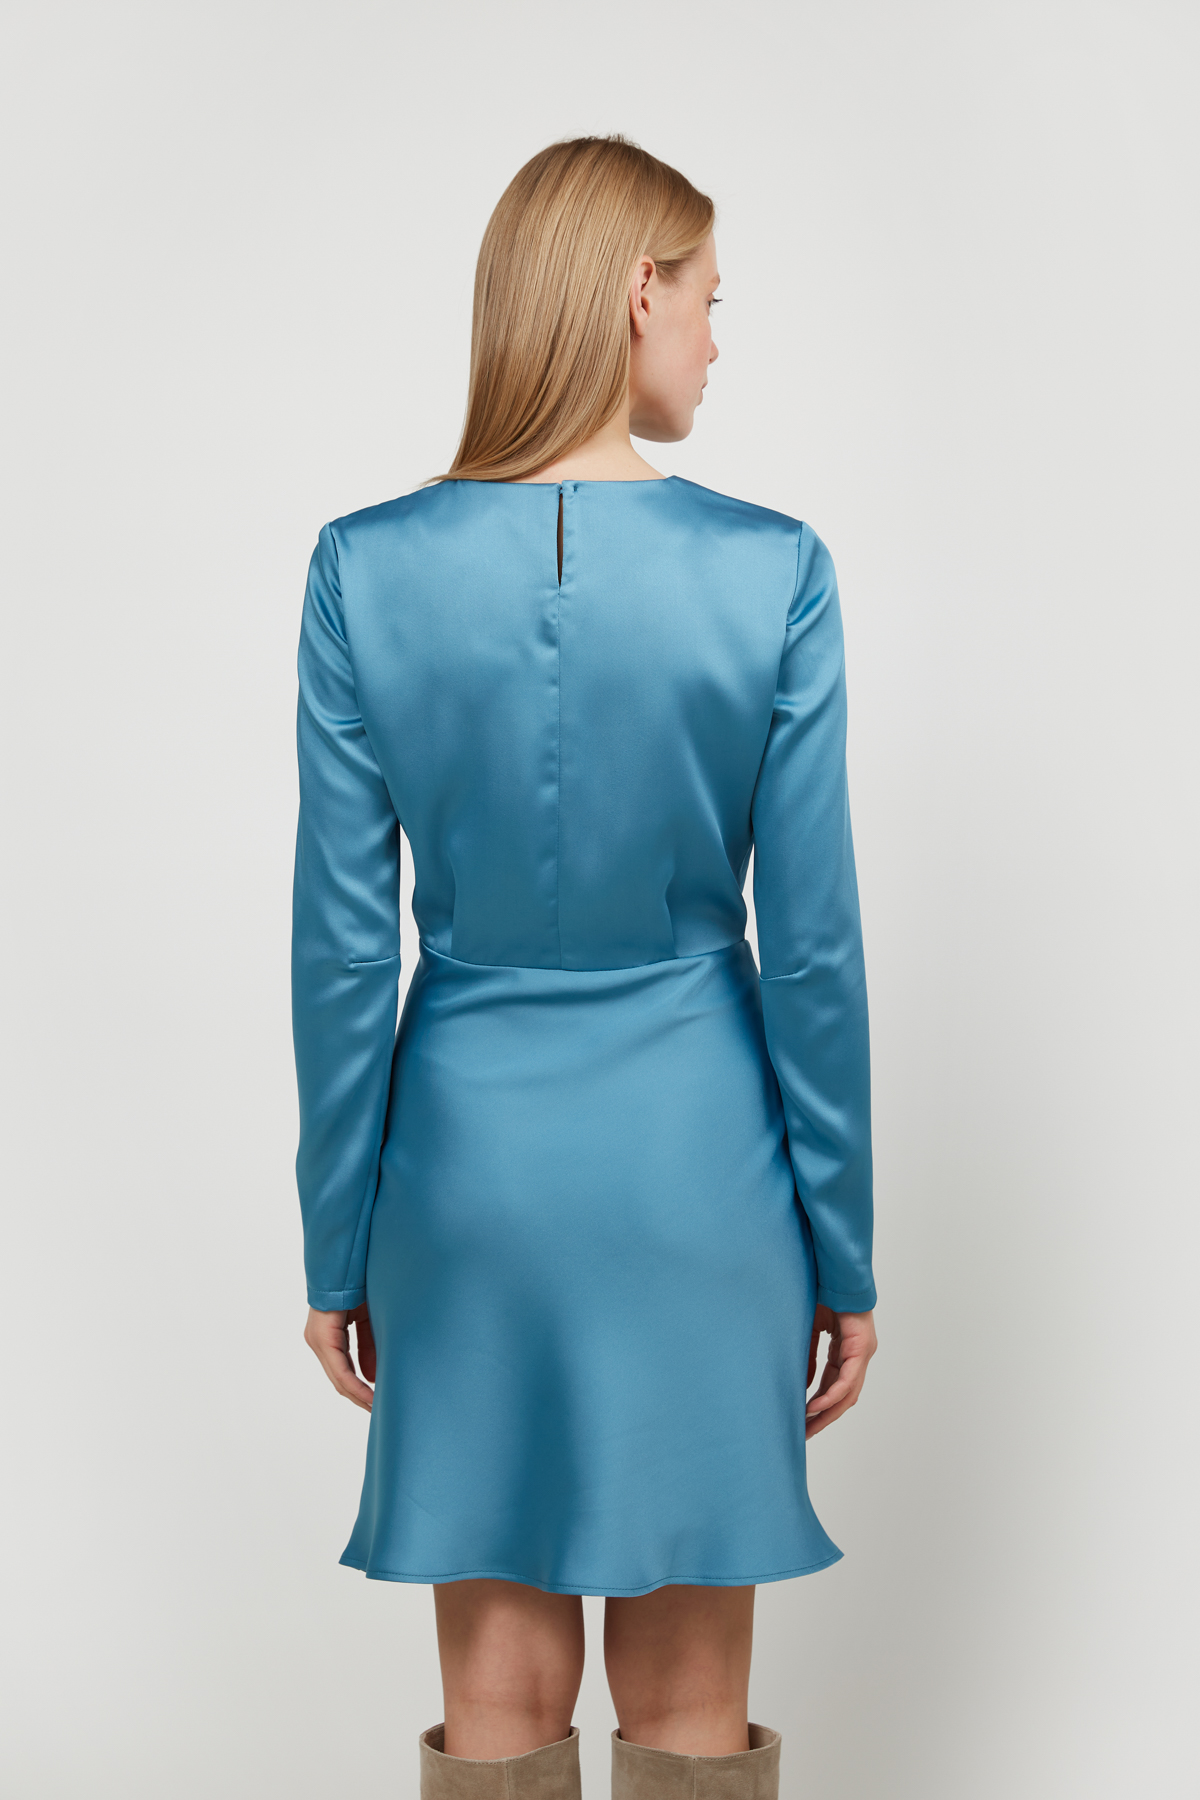 Short blue dress in satin with long sleeves, photo 4